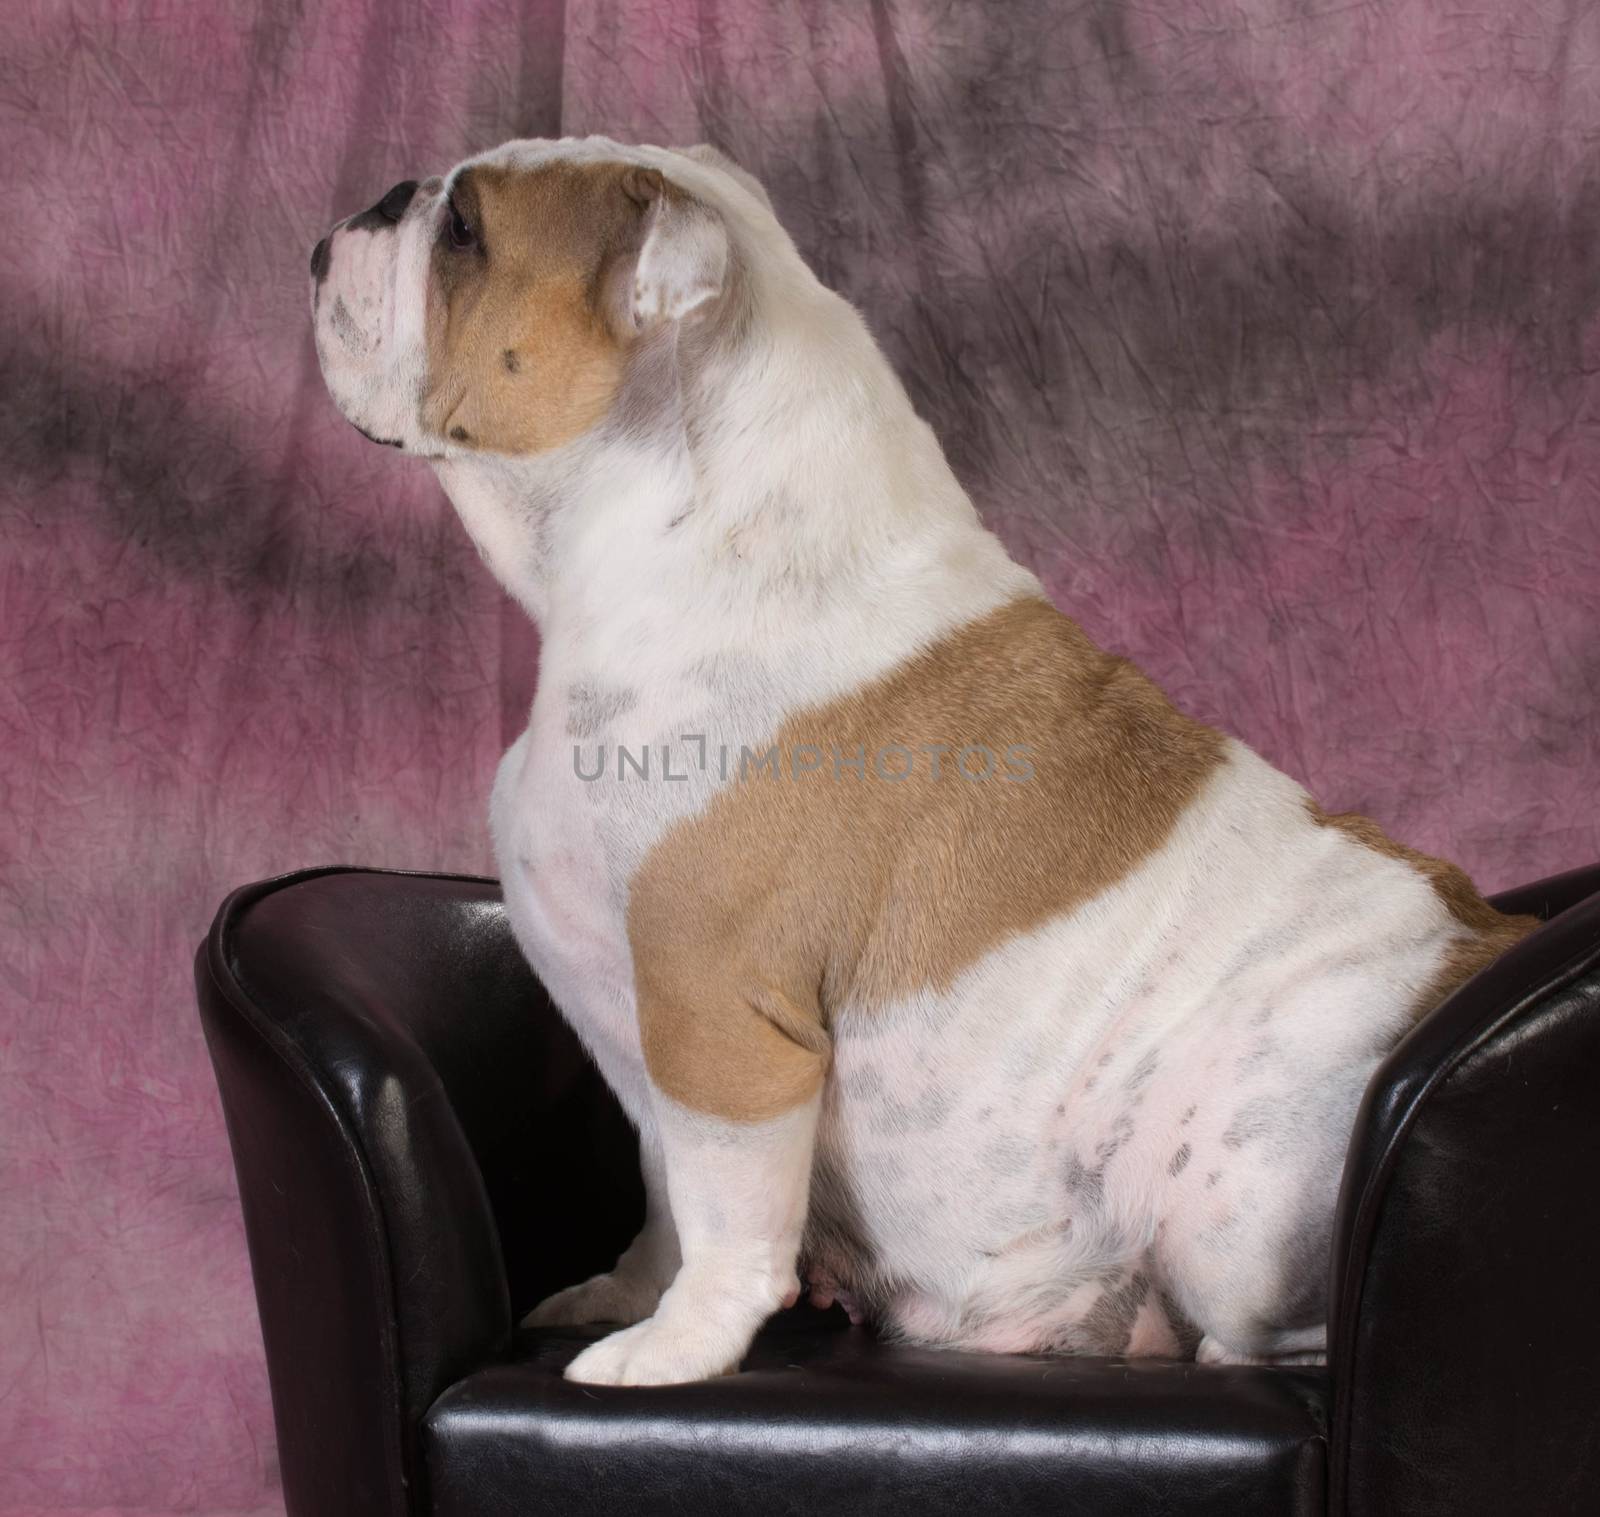 female bulldog sitting on leather couch - 4 years old